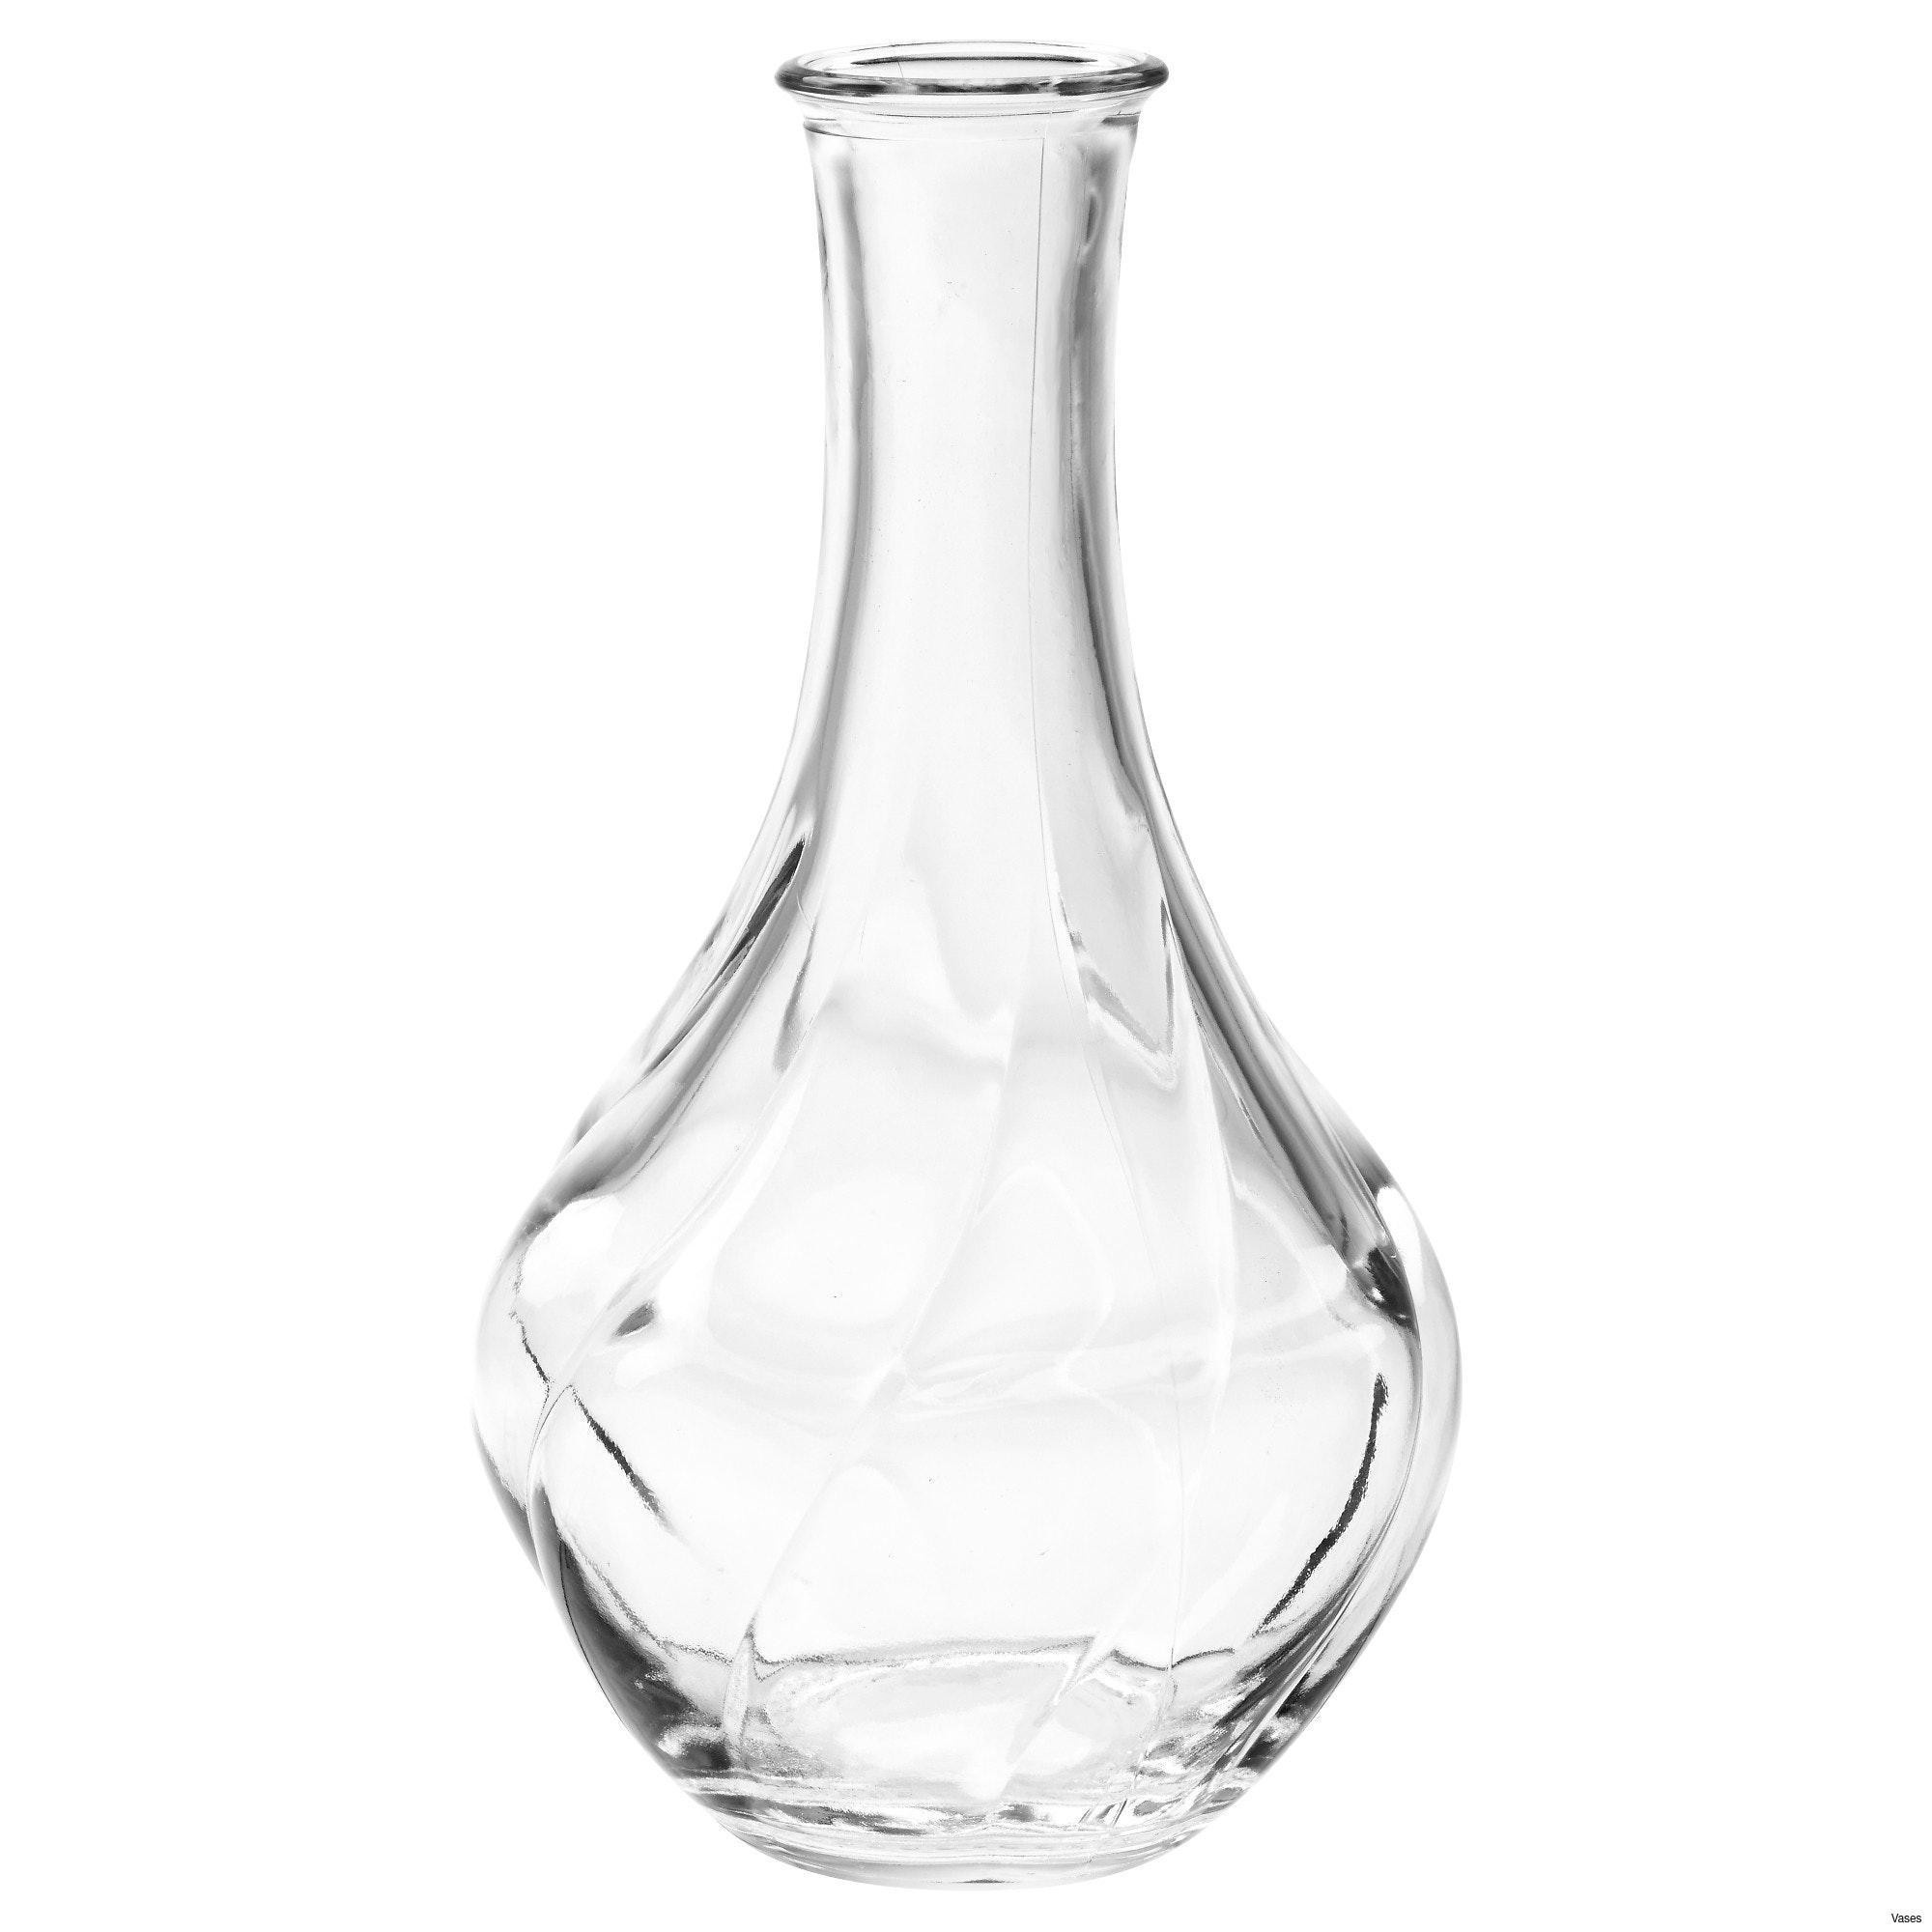 Glass Sphere Vase Of Large Black Vase Pictures What Color Goes with Black Vases Regarding Large Black Vase Collection Living Room Glass Vases Fresh Clear Vase 0d Tags Amazing and Of